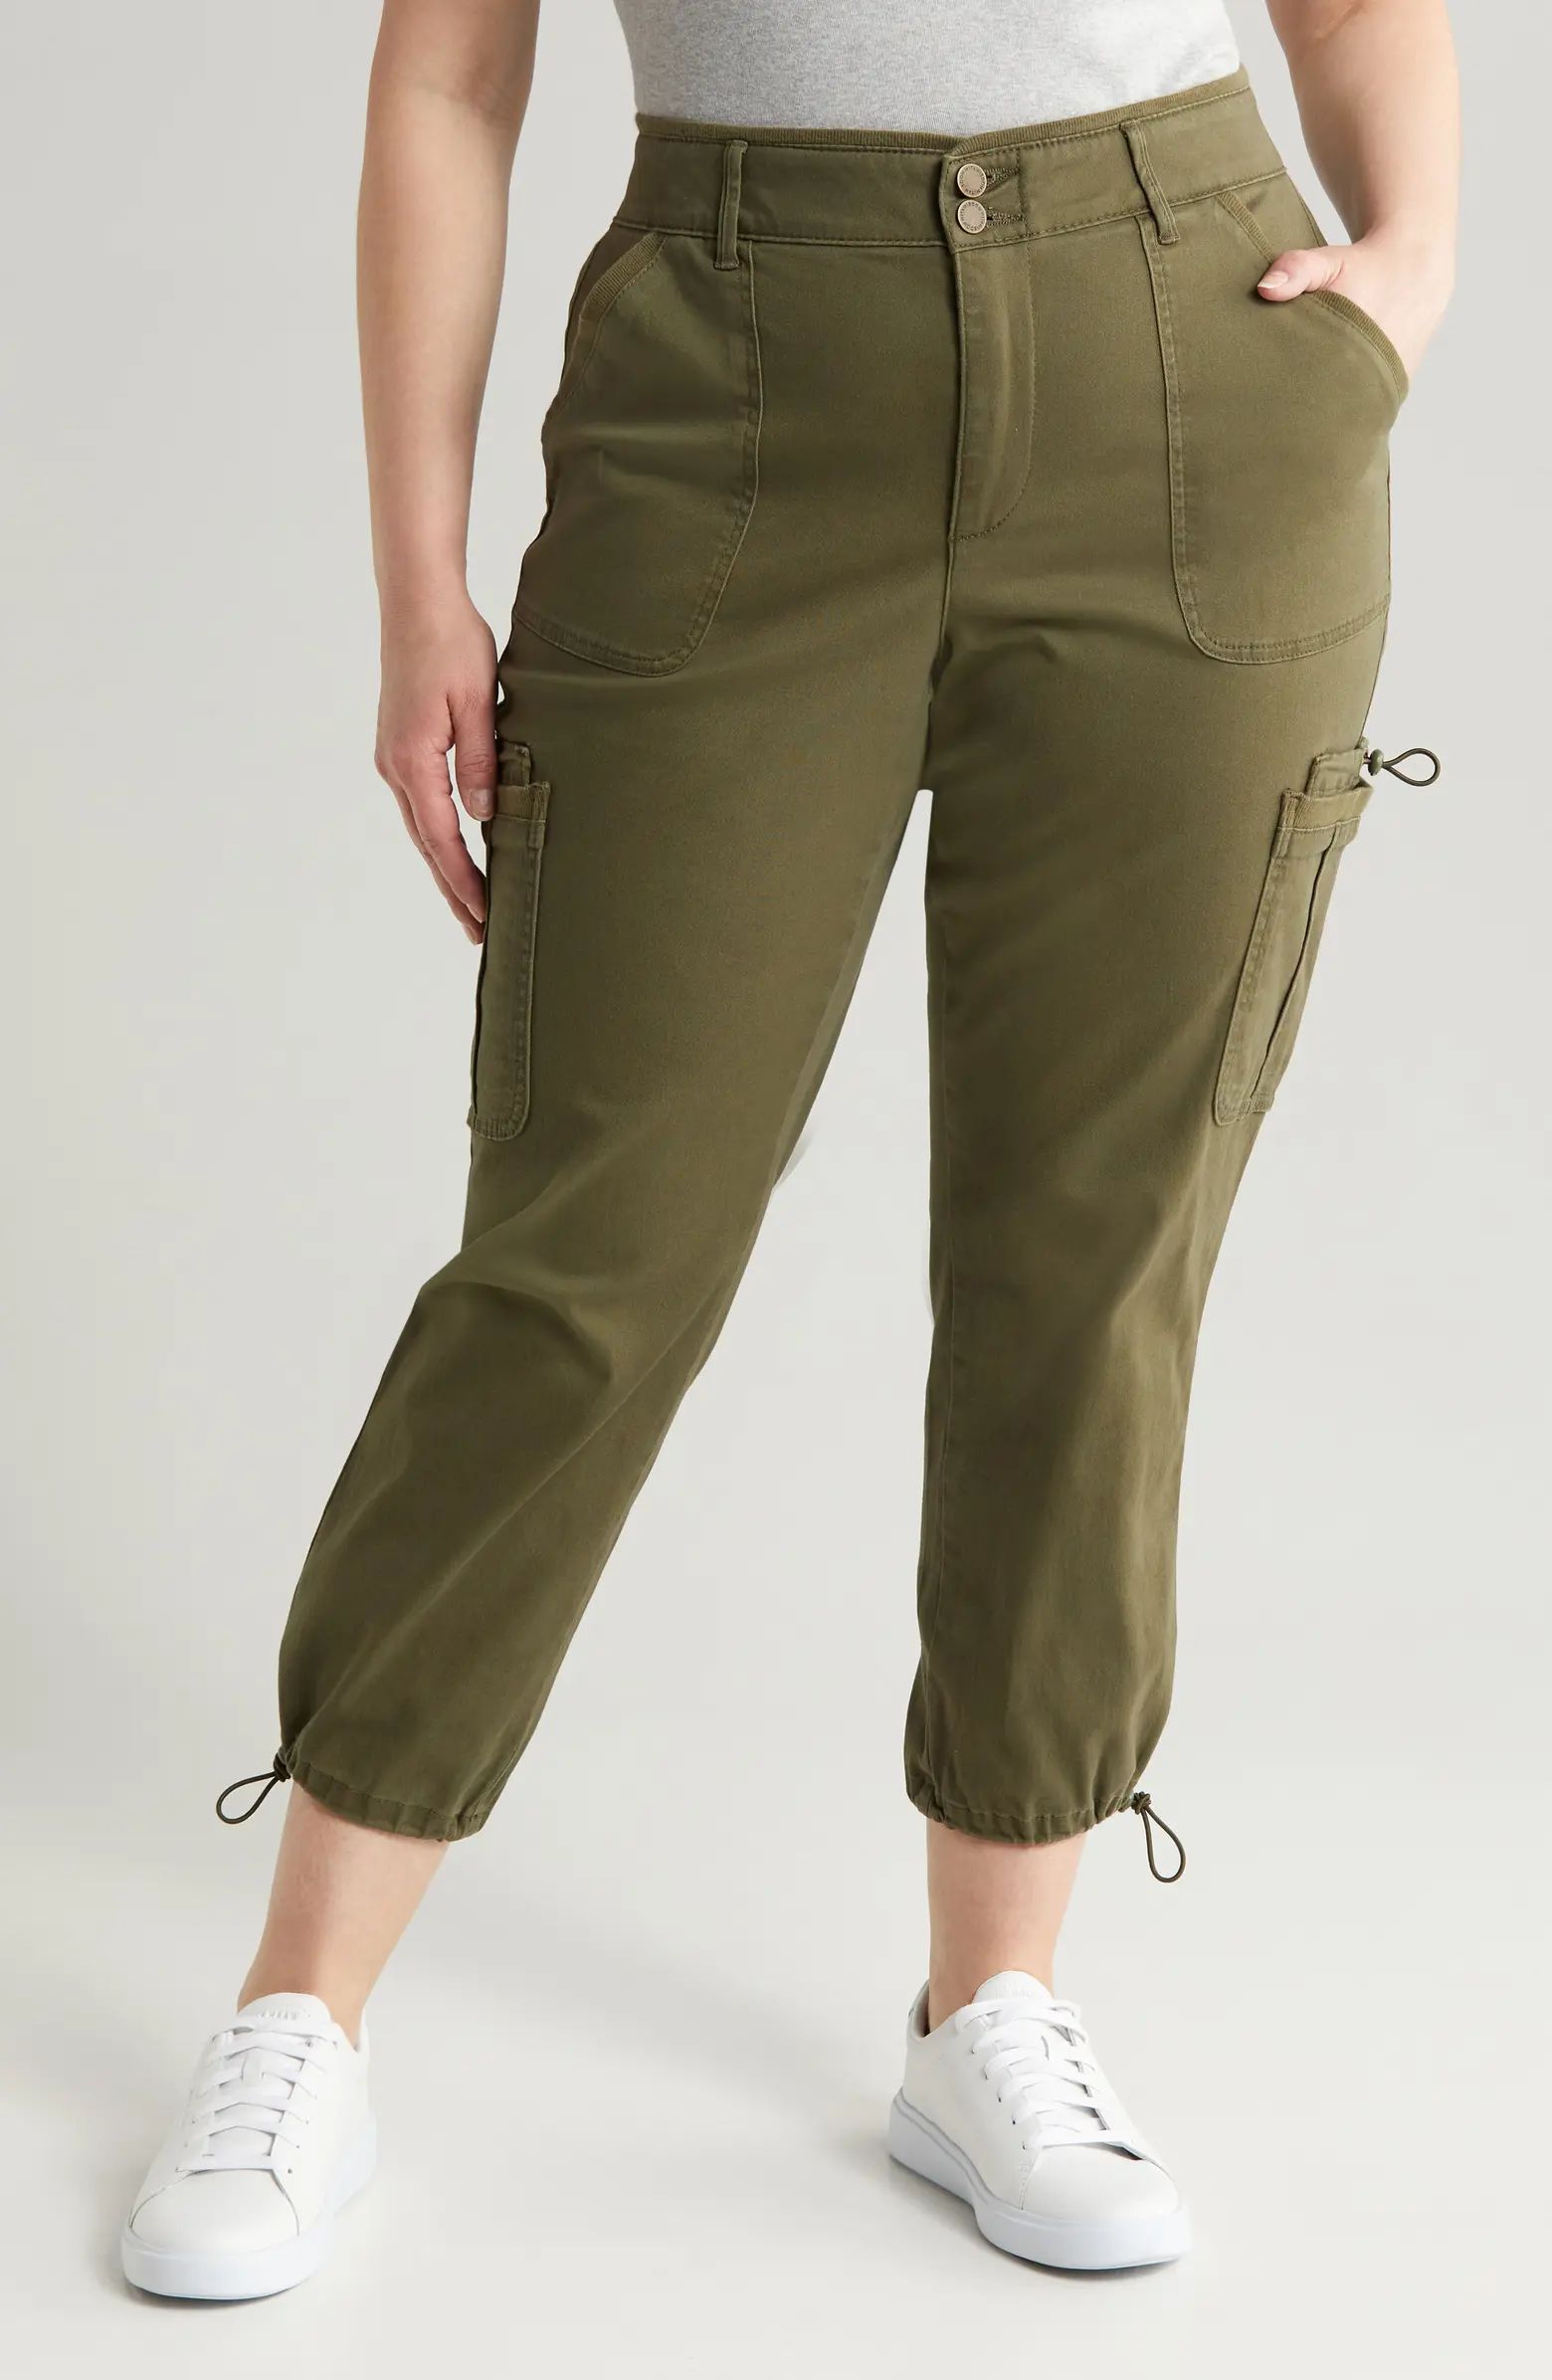 'Ab'Solution Skyrise Ankle Stretch Twill Cargo Pants | Nordstrom